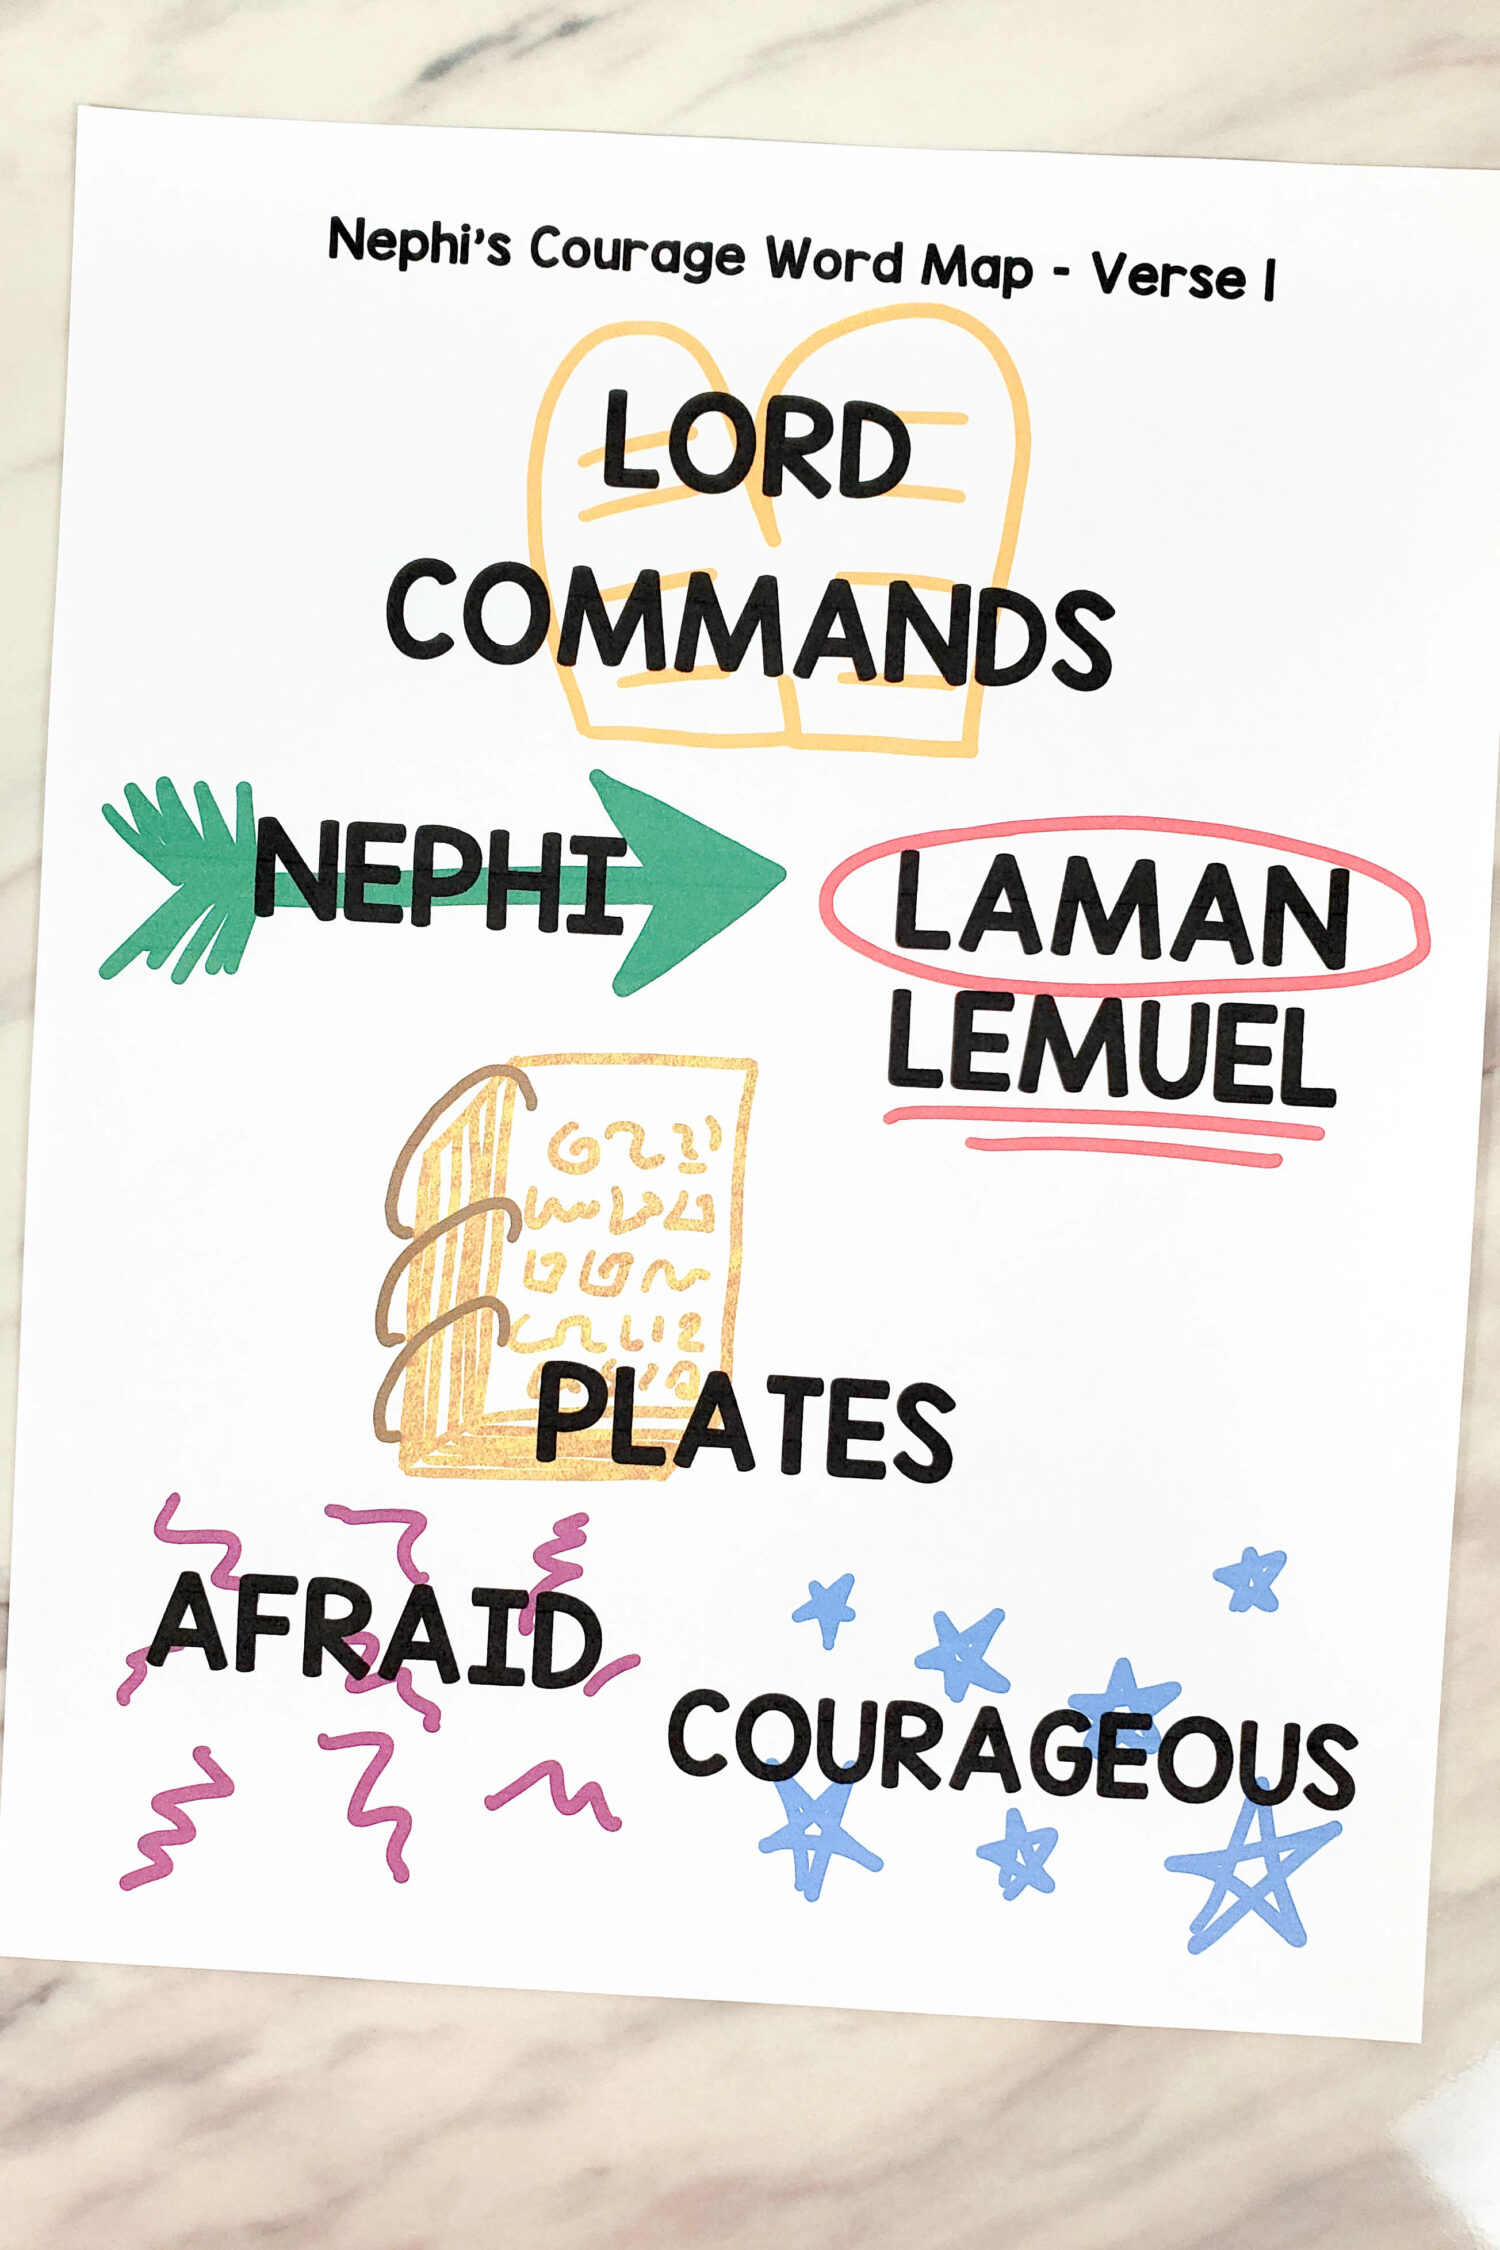 Nephi's Courage Word Map singing time activity to help you teach about being courageous even in hard times and trusting in the lord! Printable song helps for LDS Primary music leaders and families for Book of Mormon Come Follow Me.